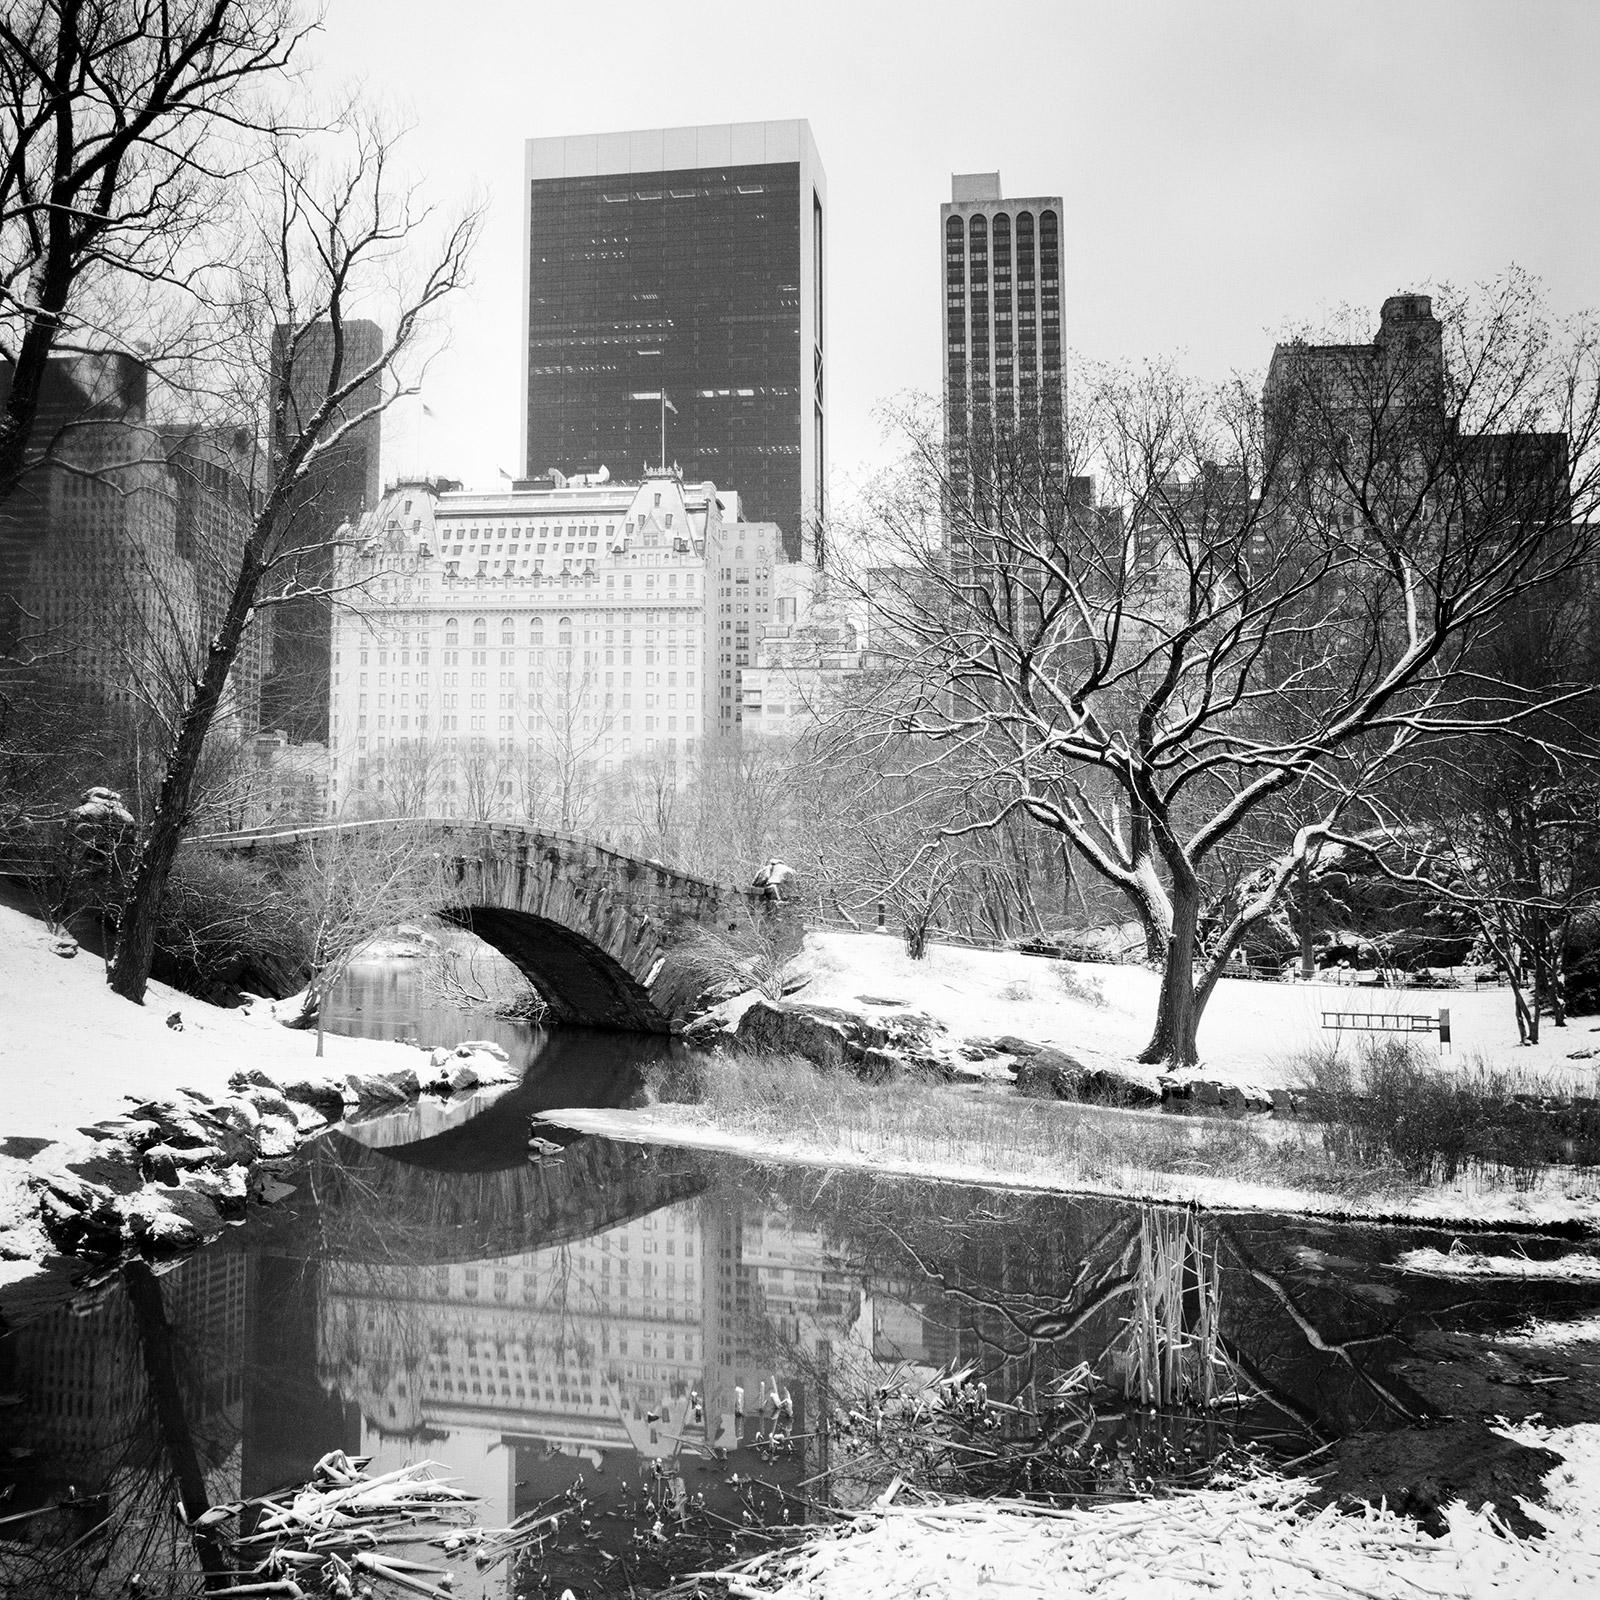 Gerald Berghammer Landscape Photograph - Snow covered Central Park, New York City, black and white photography landscapes